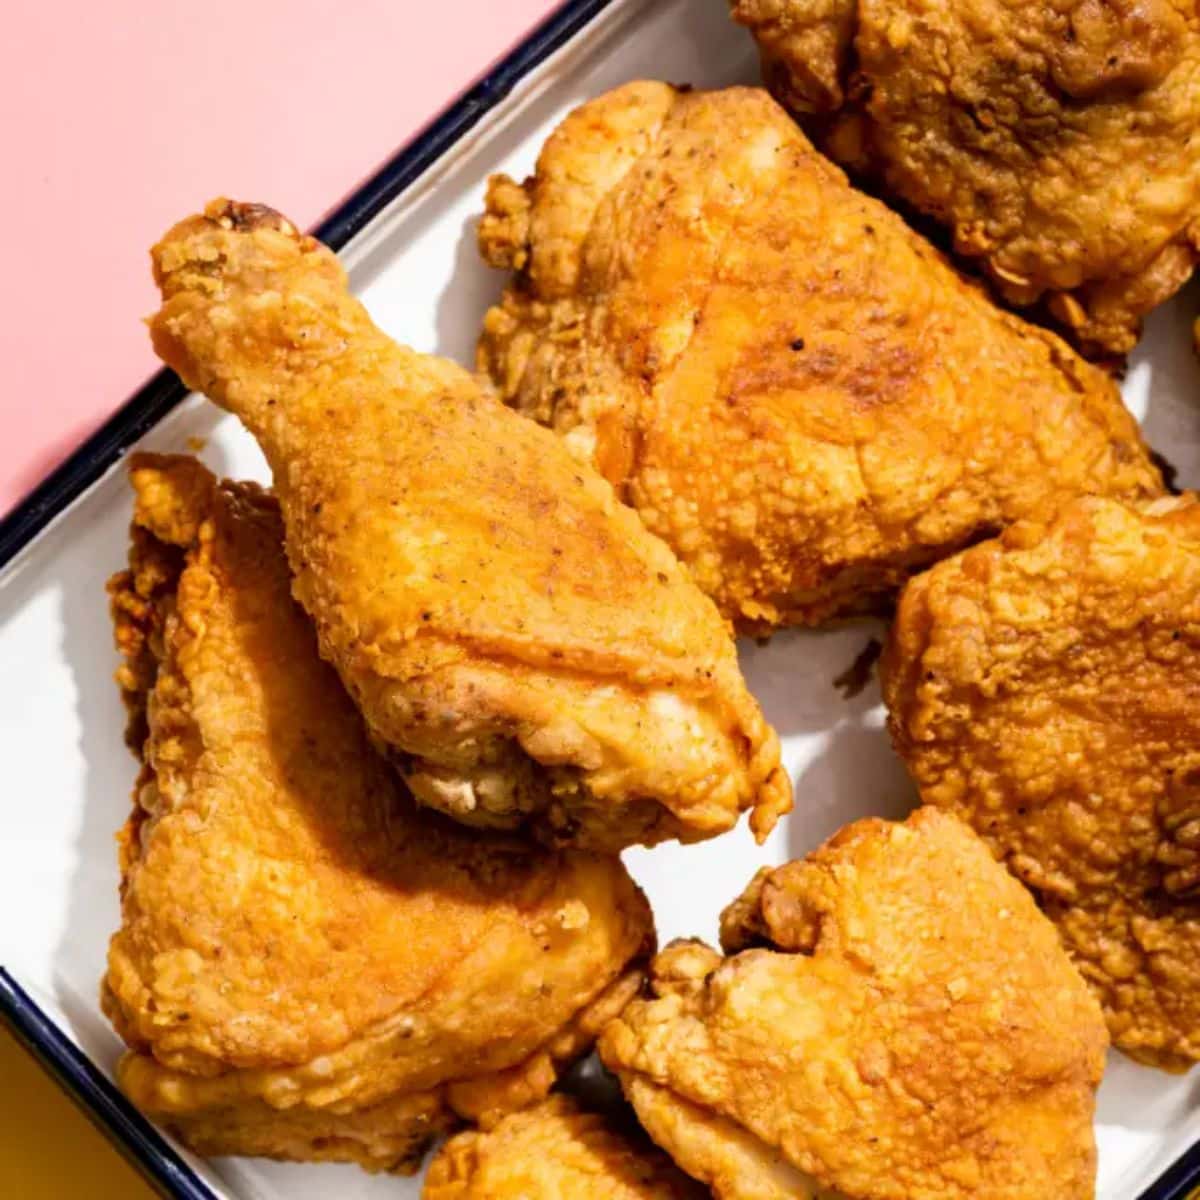 Delicious lard-fried chicken in a tray.